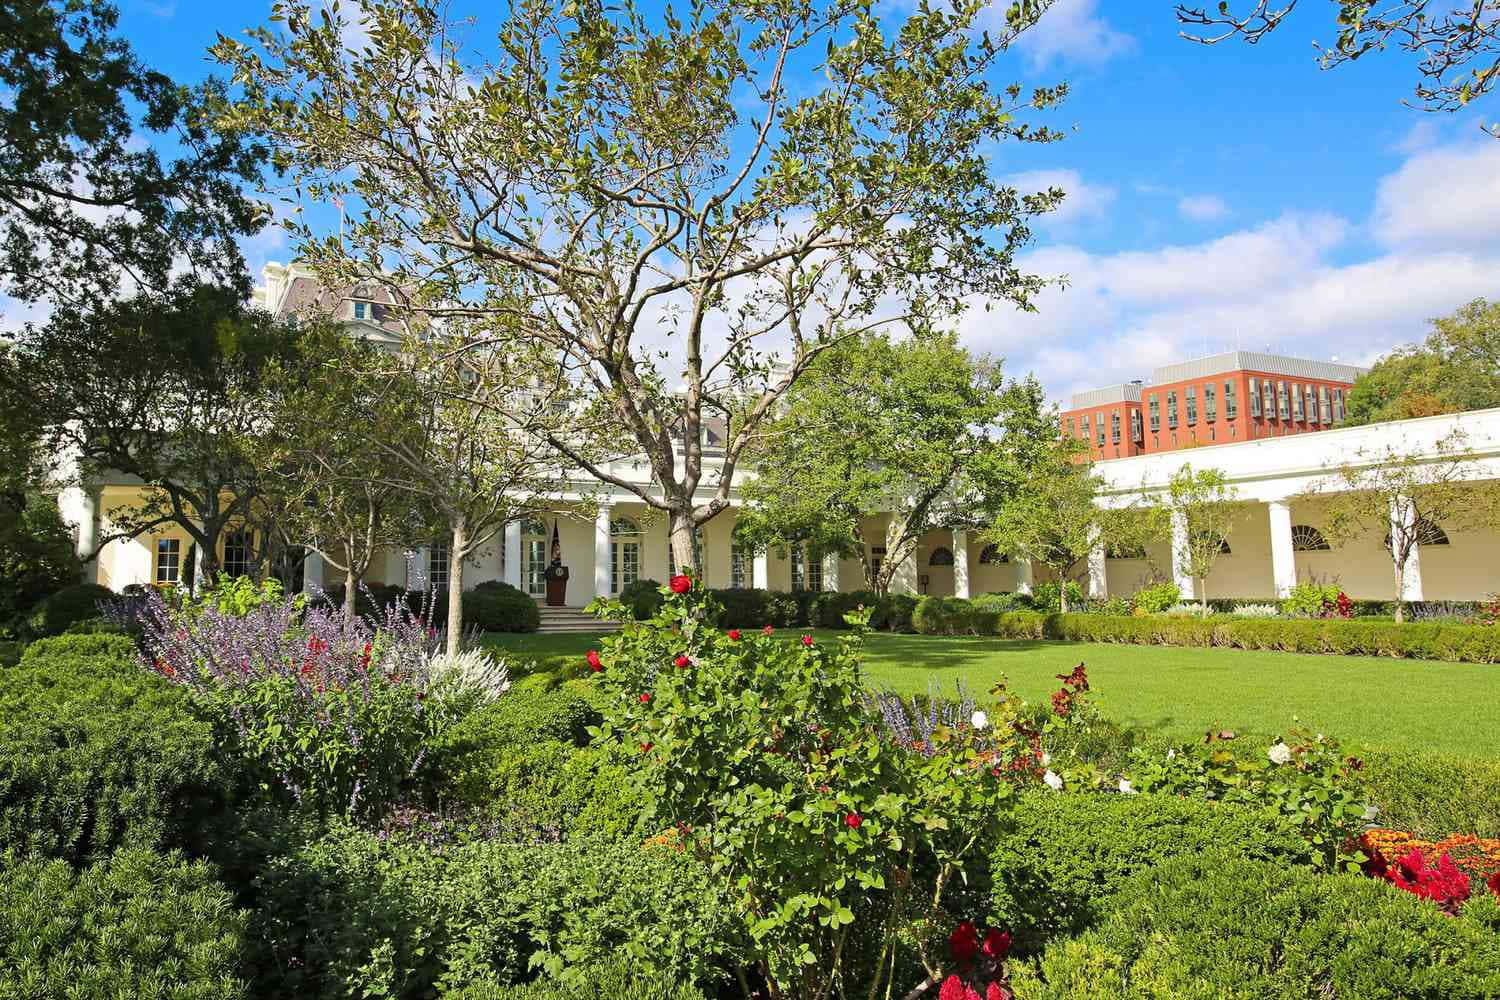 The White House Garden Is Surrounded By Trees And Shrubs